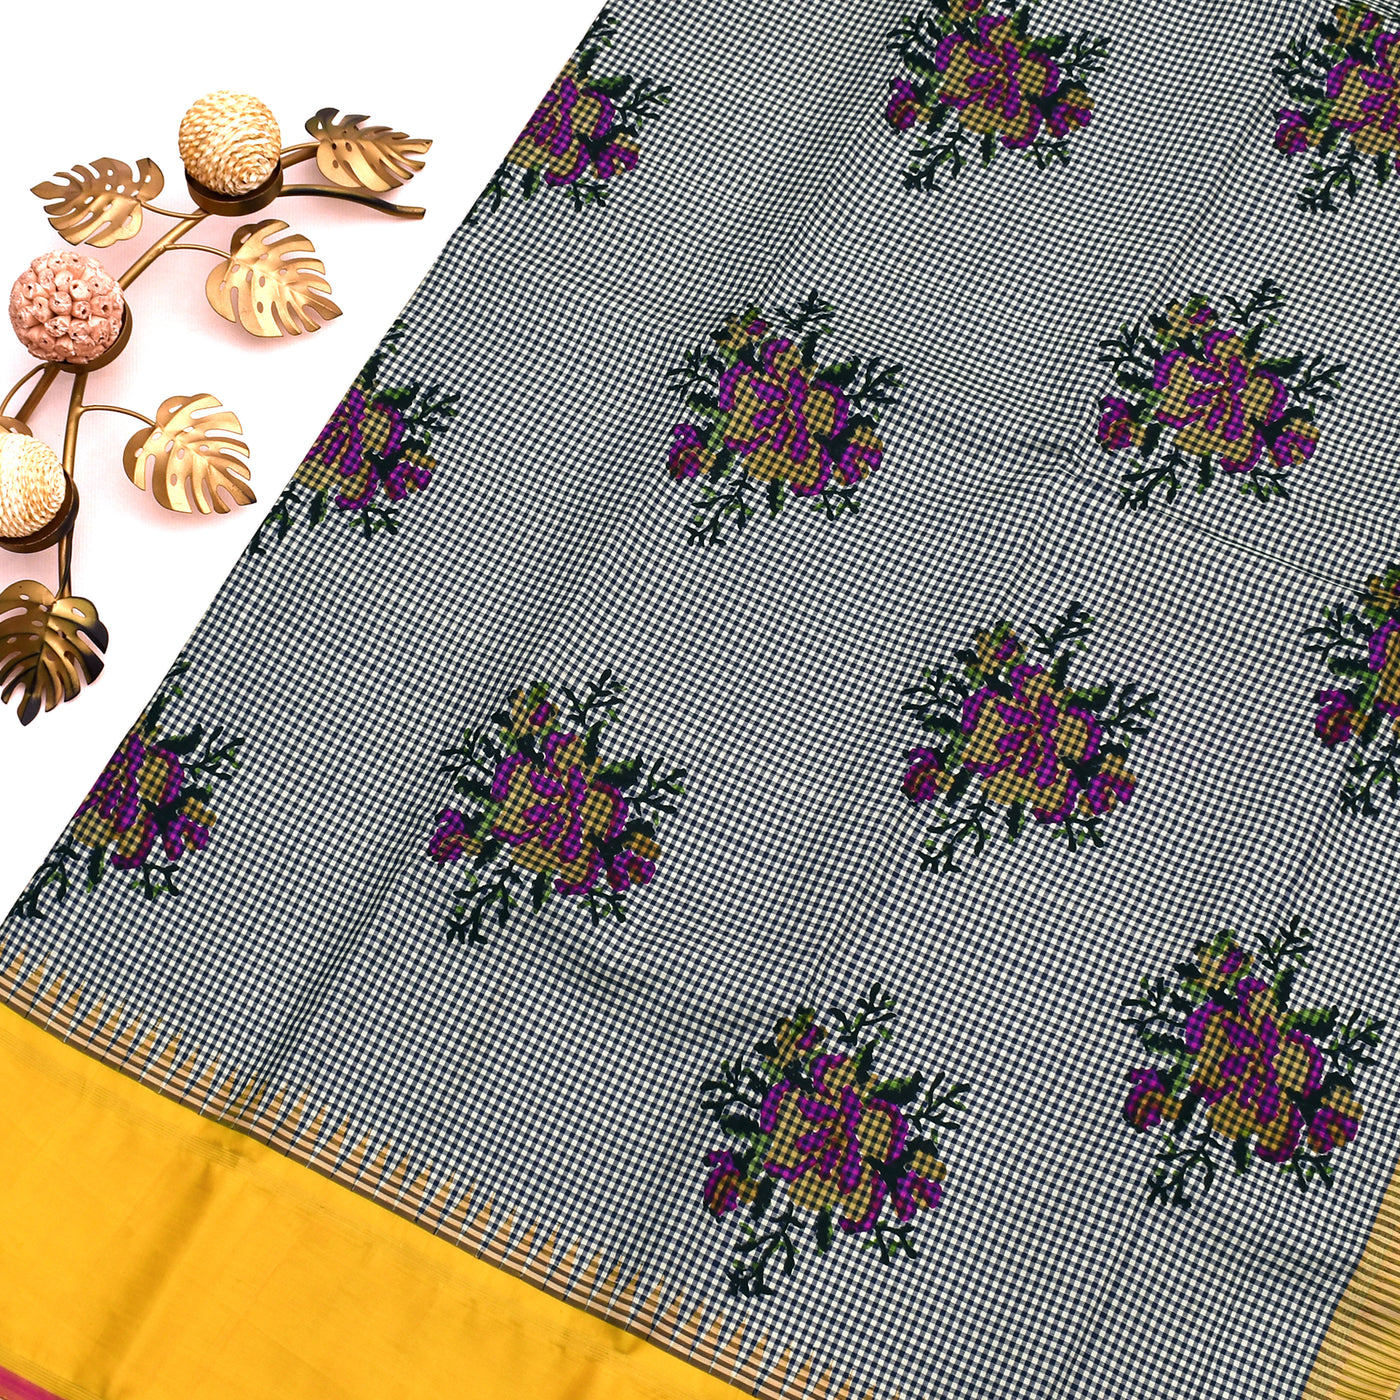 Off White Printed Kanchi Silk Saree with Small Checked Design